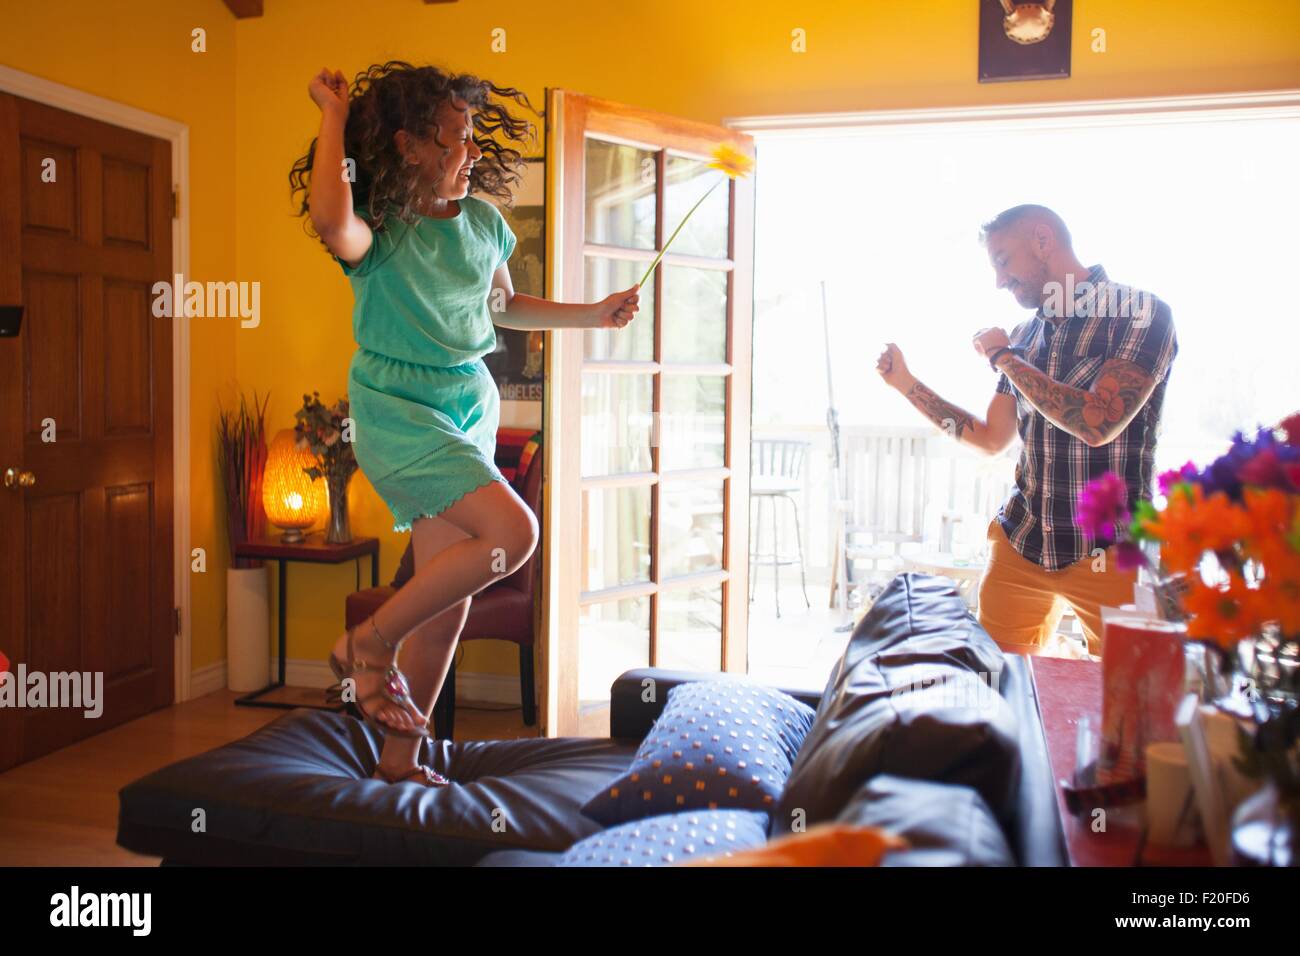 Girl and father dancing in living room Stock Photo